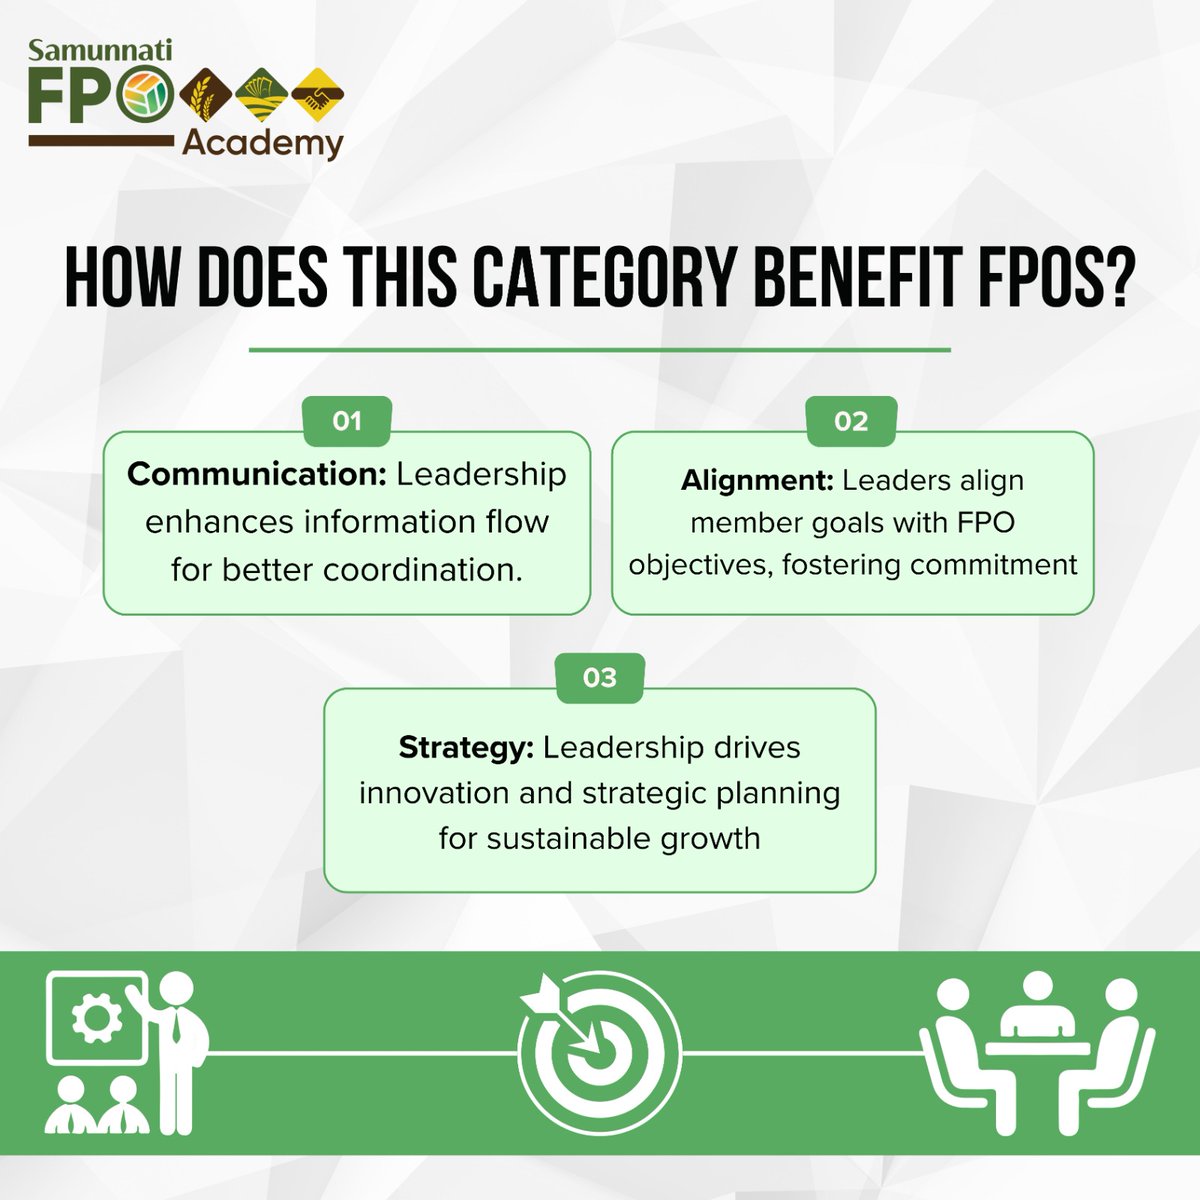 Welcome to Category 3 of the FPO Academy: Leadership Skills! Learn effective leadership to steer your FPO to success. Unlock your potential and make a difference!

#Samunnati #FPOACADEMY #fpoacademy #LeadershipSkills